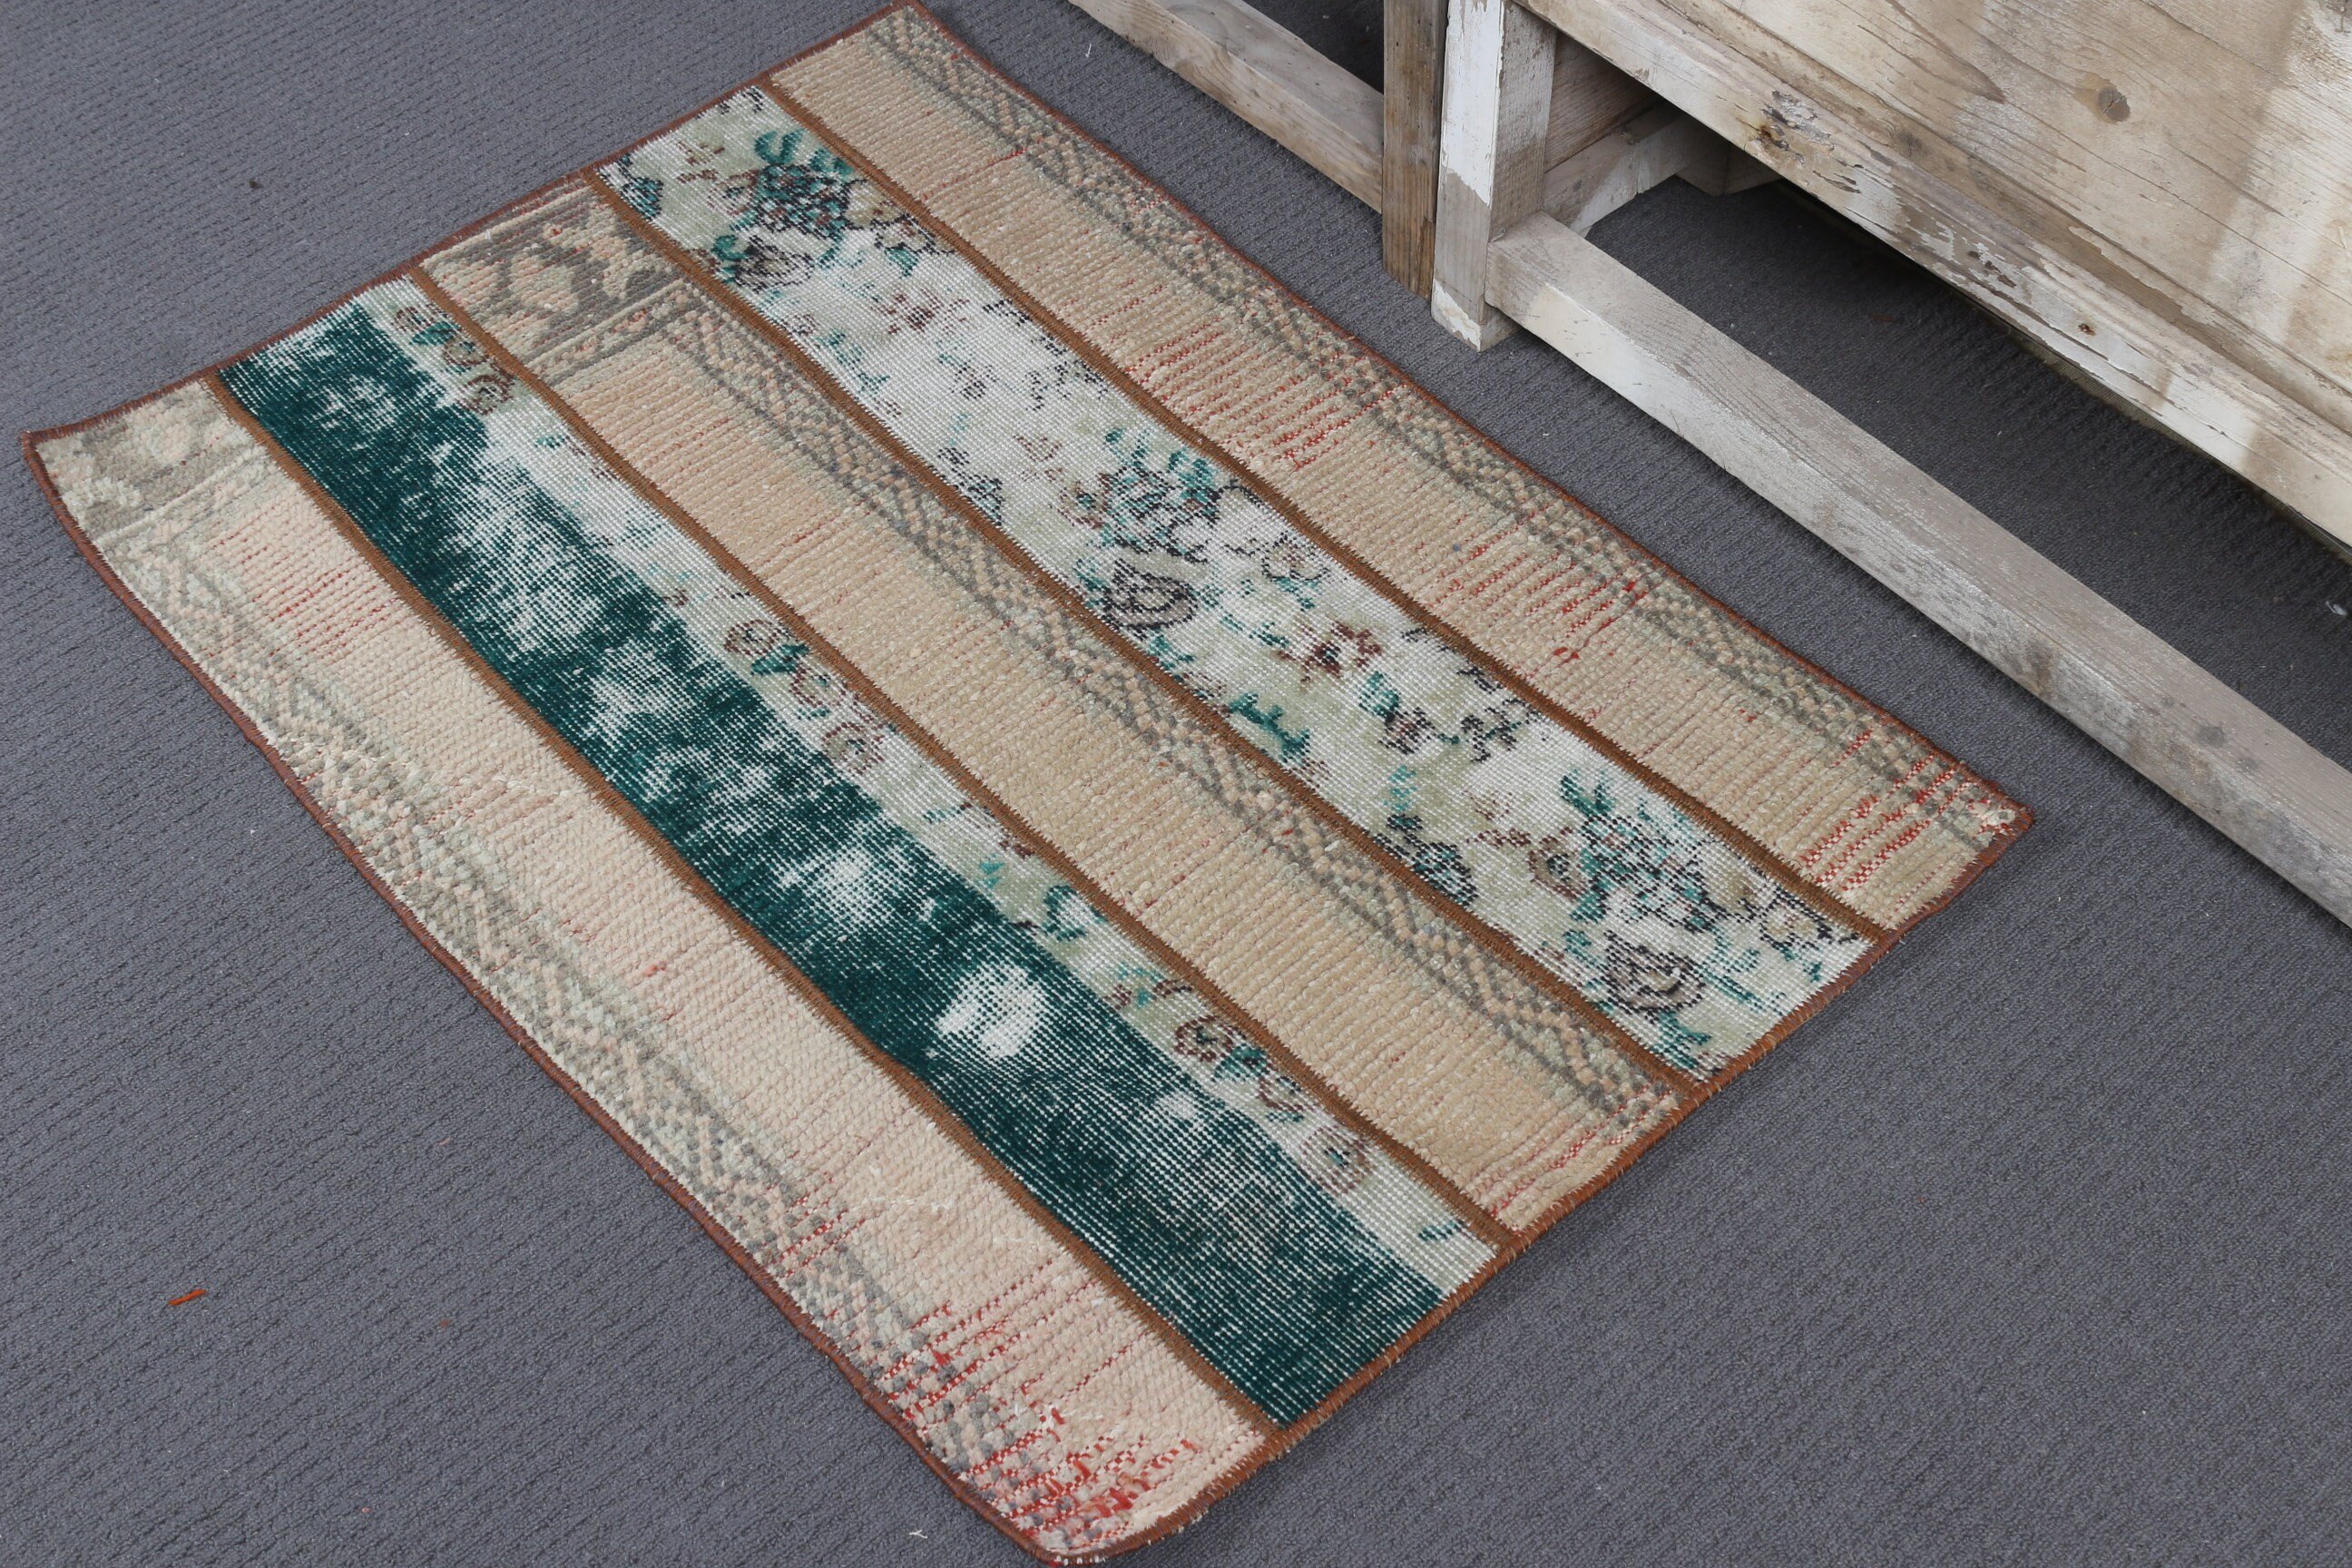 Beige Bedroom Rugs, Antique Rugs, Turkish Rugs, Rugs for Kitchen, 2.2x3.2 ft Small Rug, Vintage Rugs, Moroccan Rug, Wall Hanging Rug